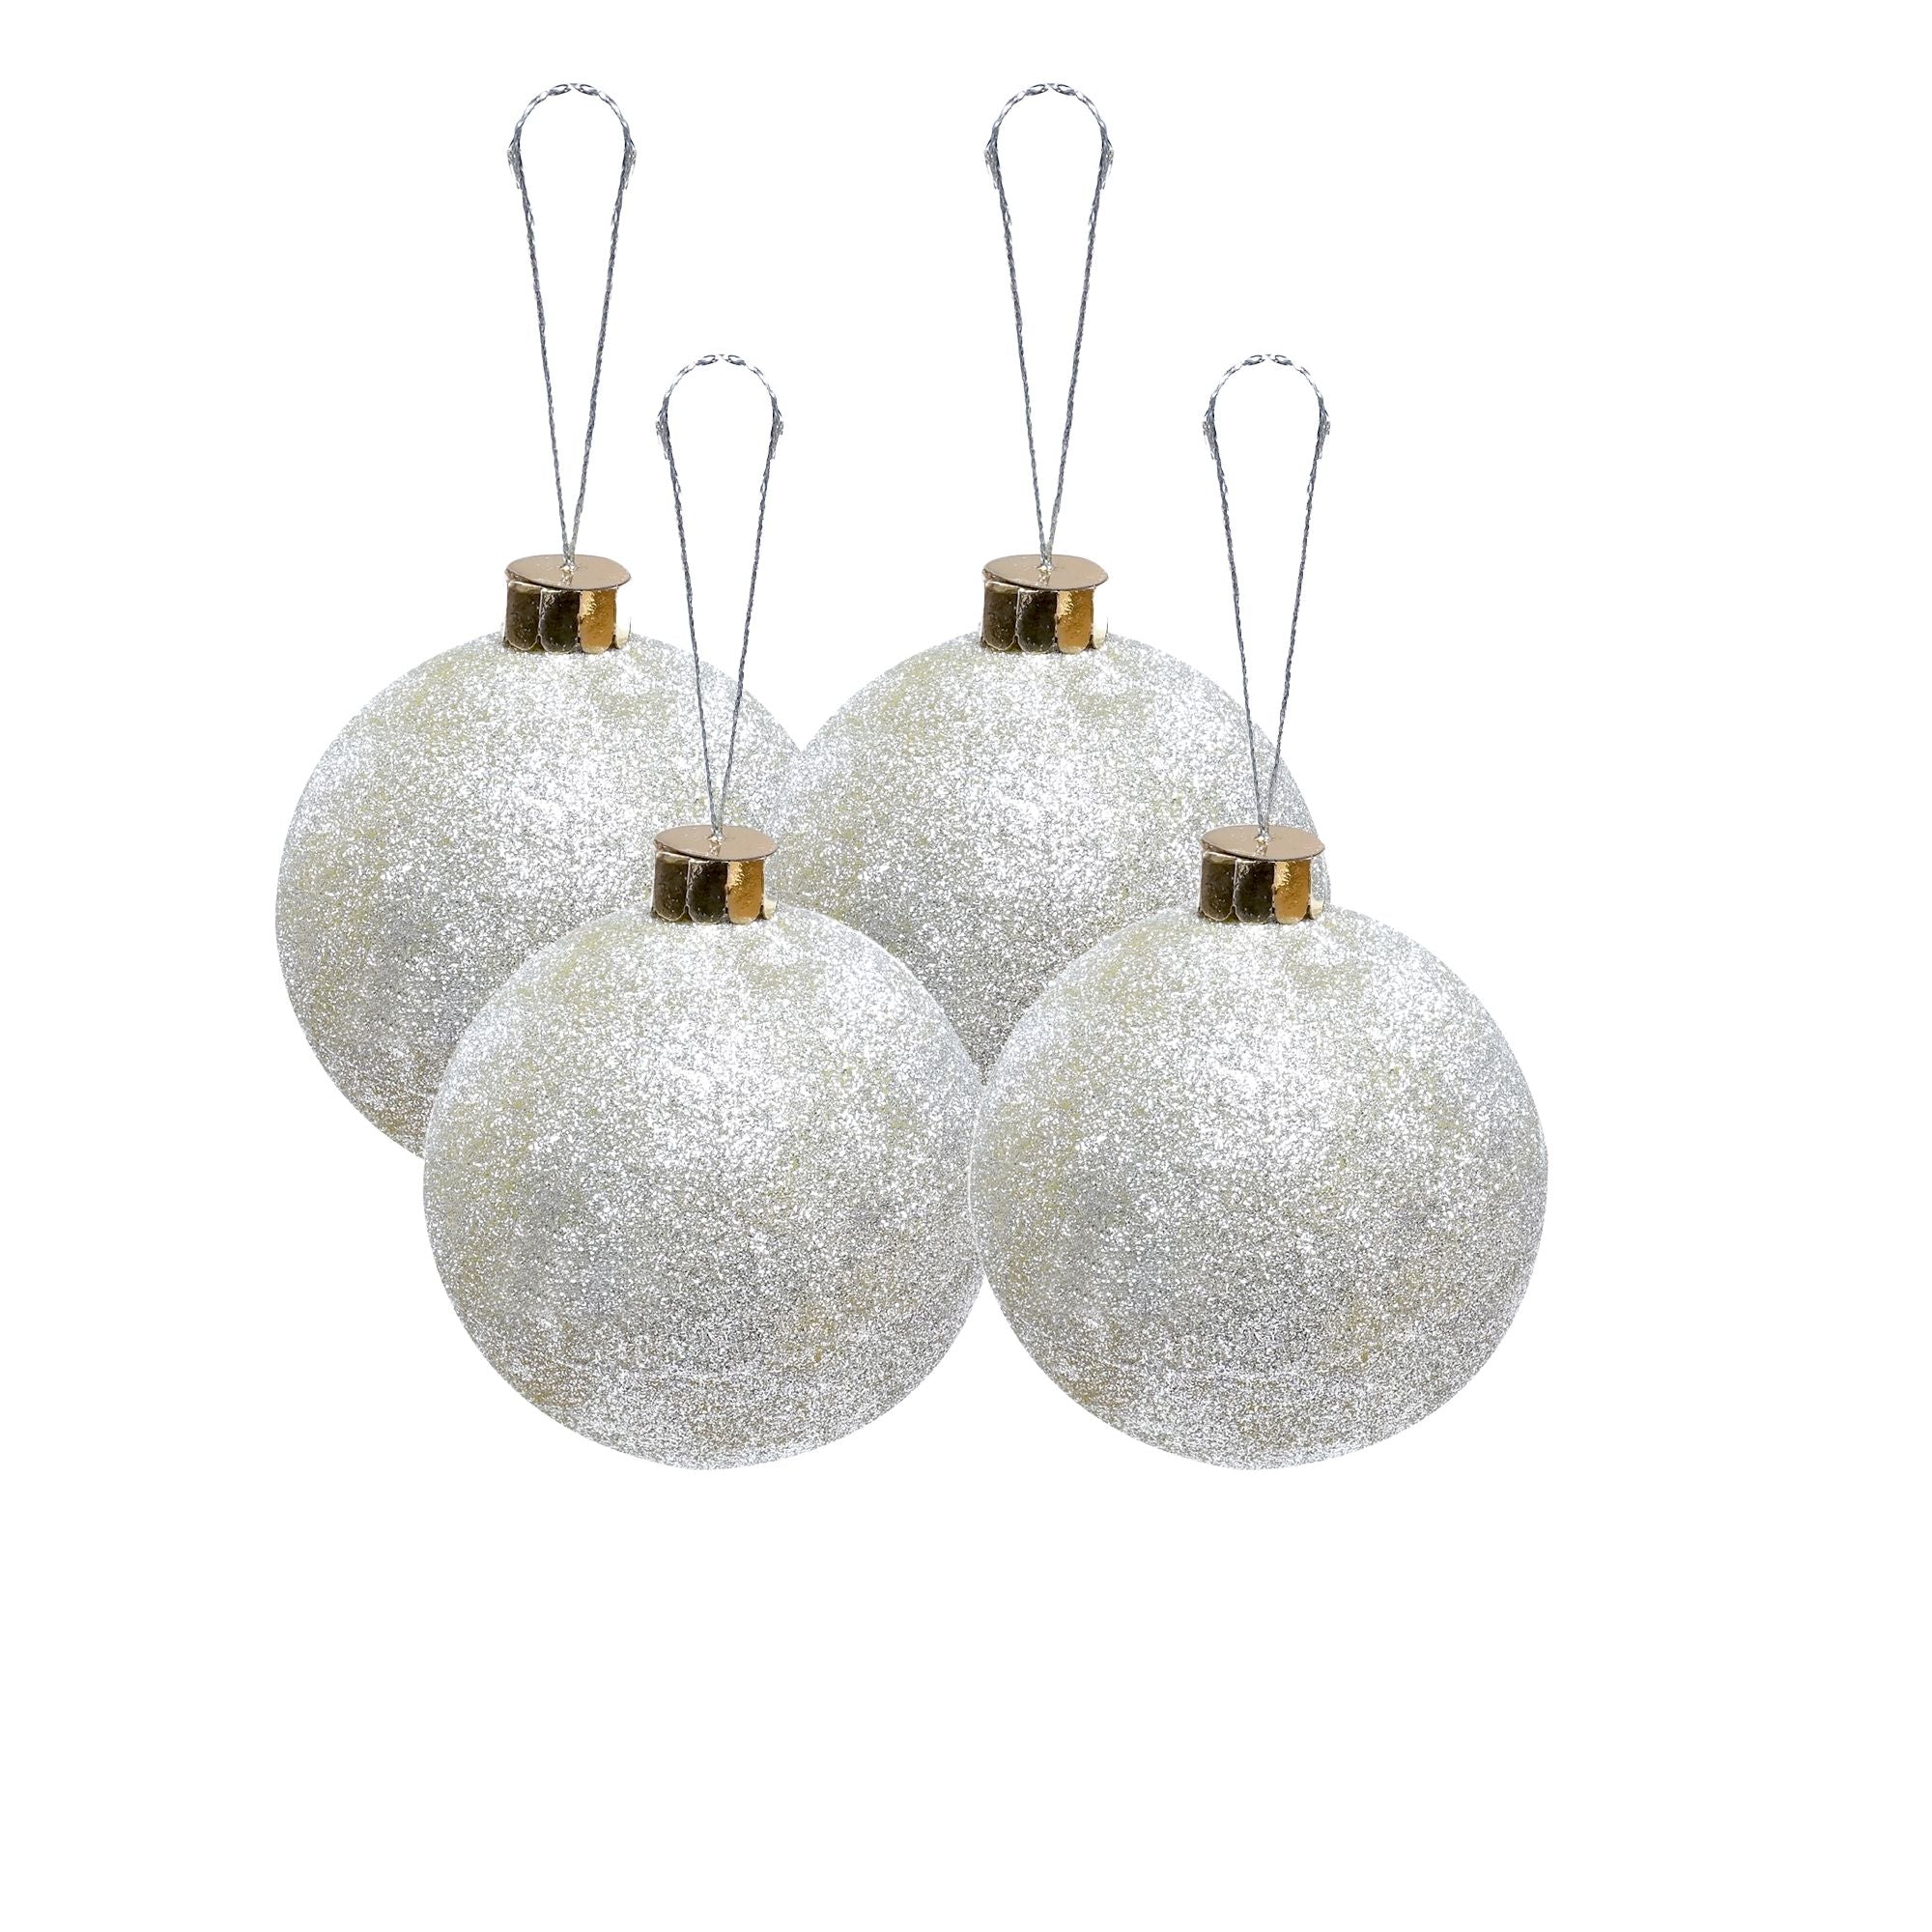 Handmade Christmas Ornaments - Glitter Baubles, 70mm, Silver, 4pc